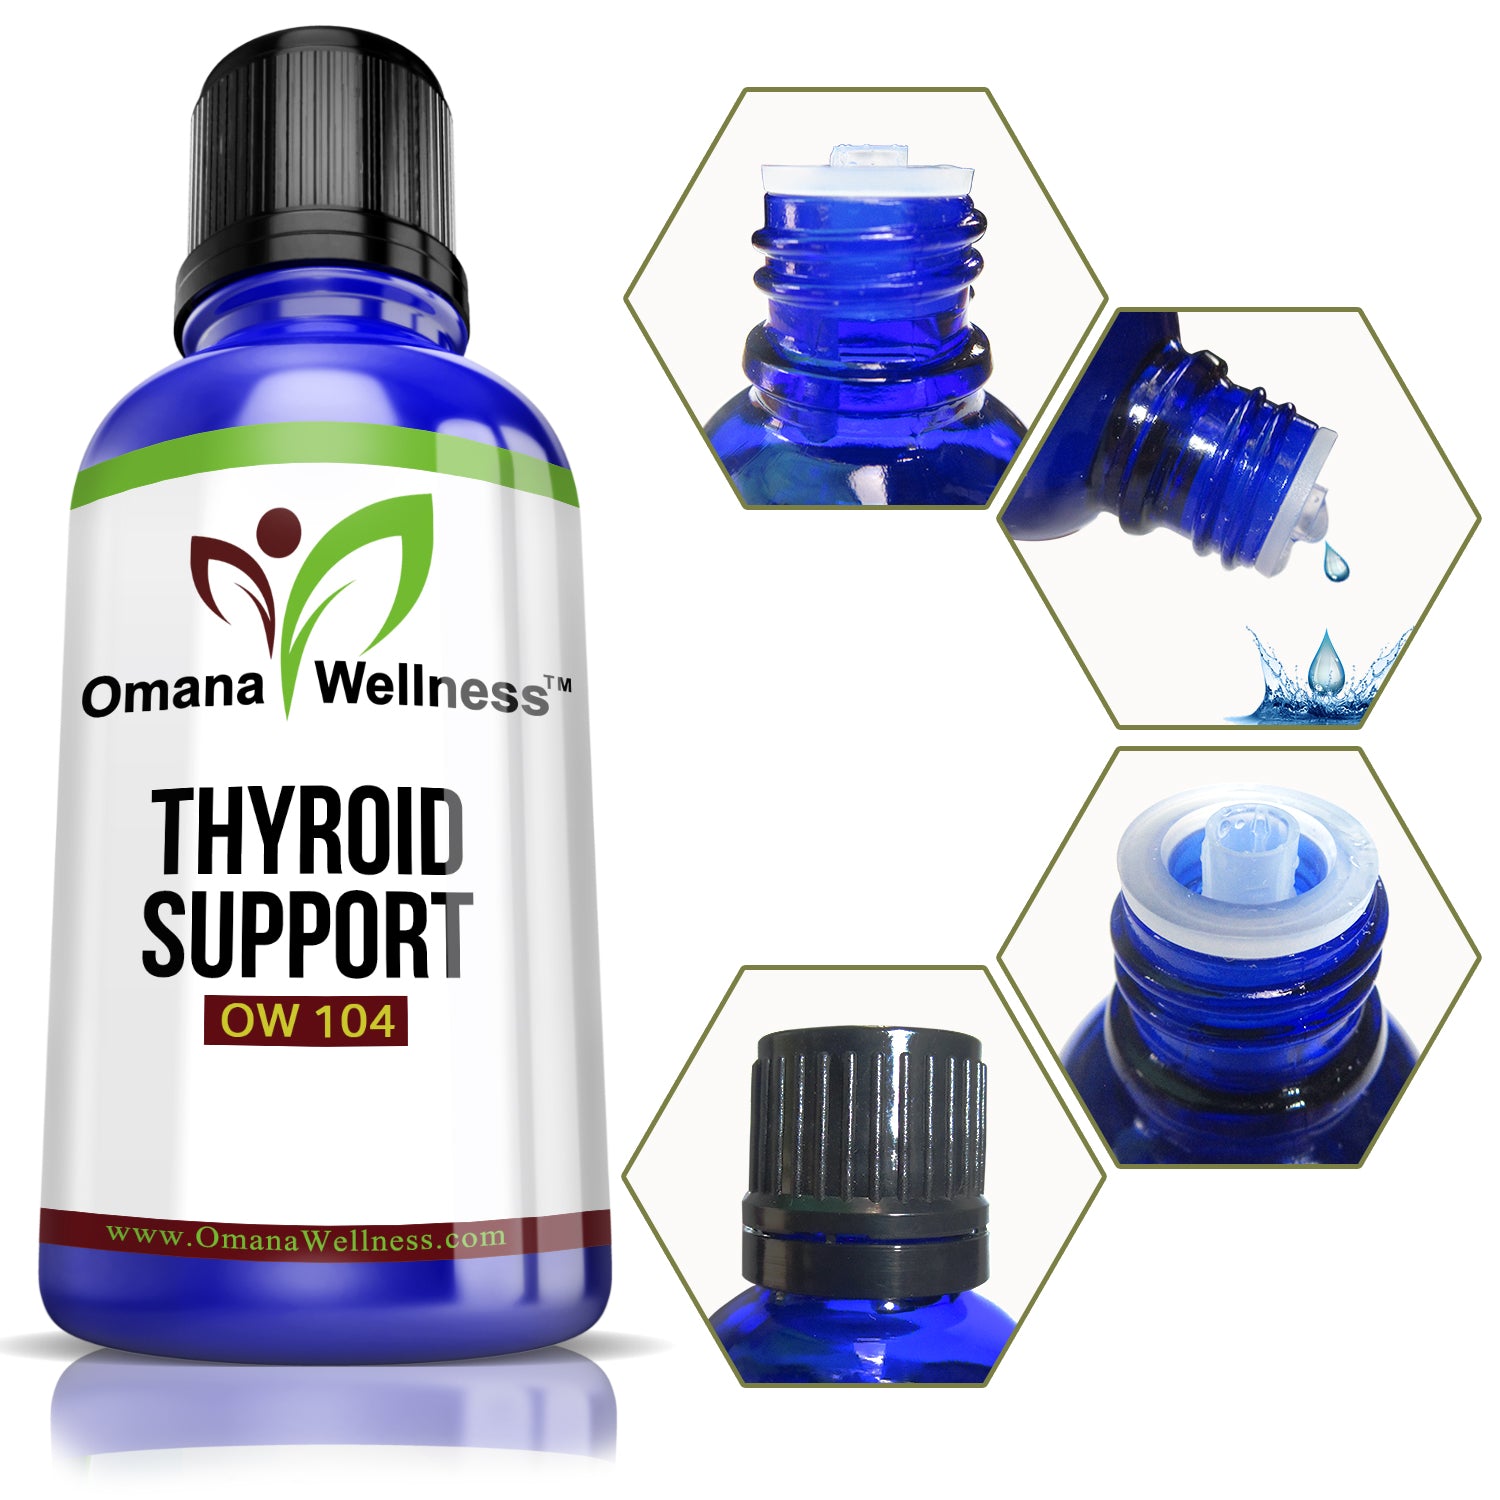 THYROID SUPPORT OW104